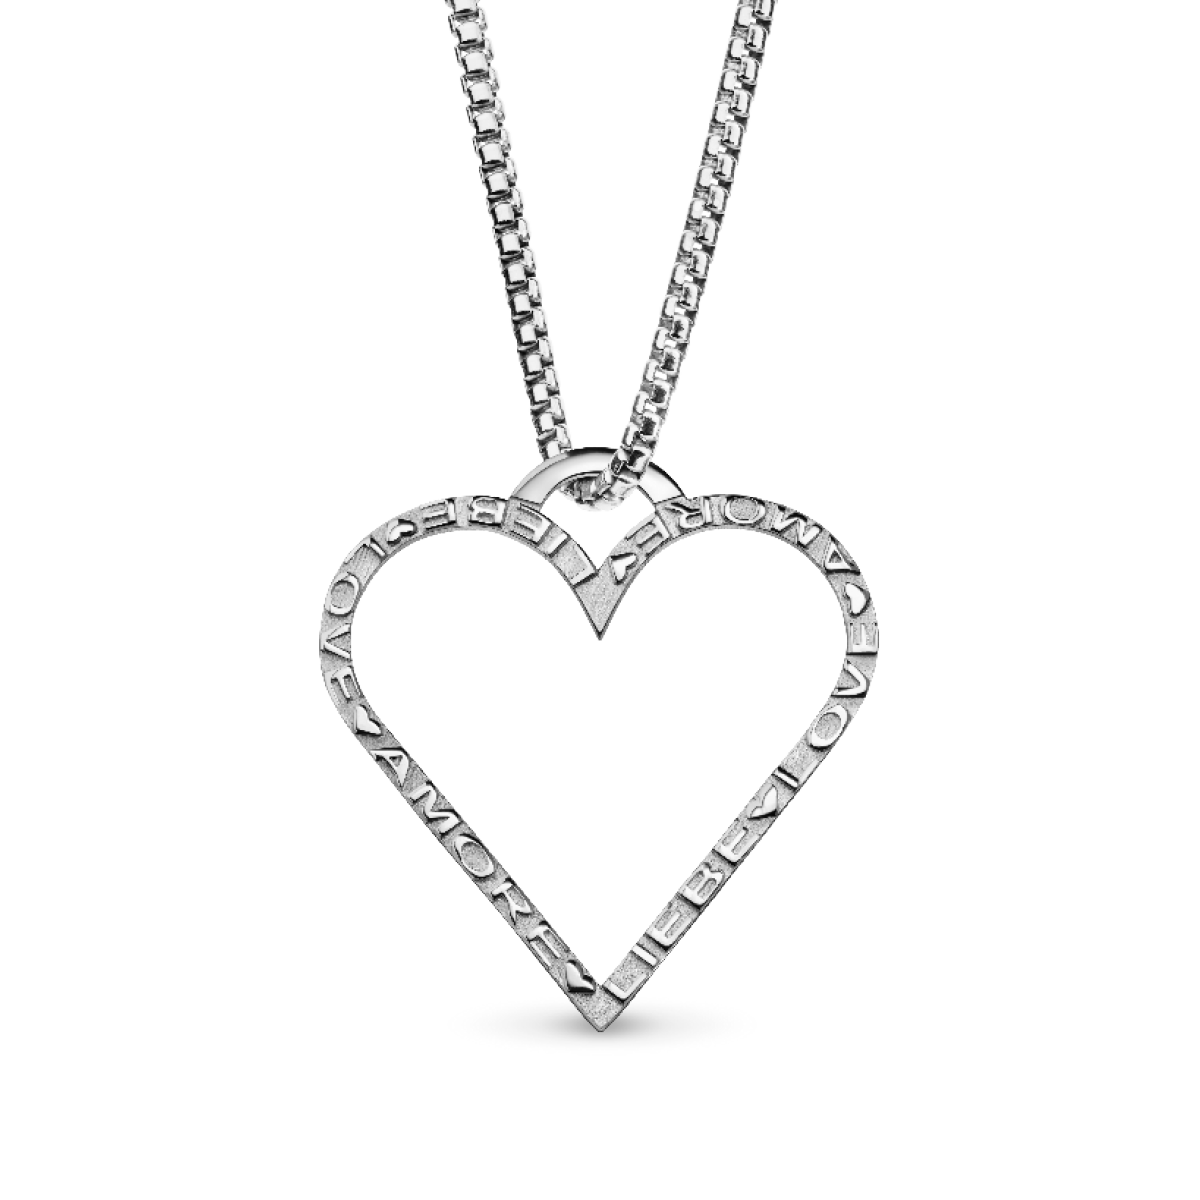 ♥Mother's Day offer gift set necklace with pendant only $225,-  instead of $304,- (Necklace free)♥